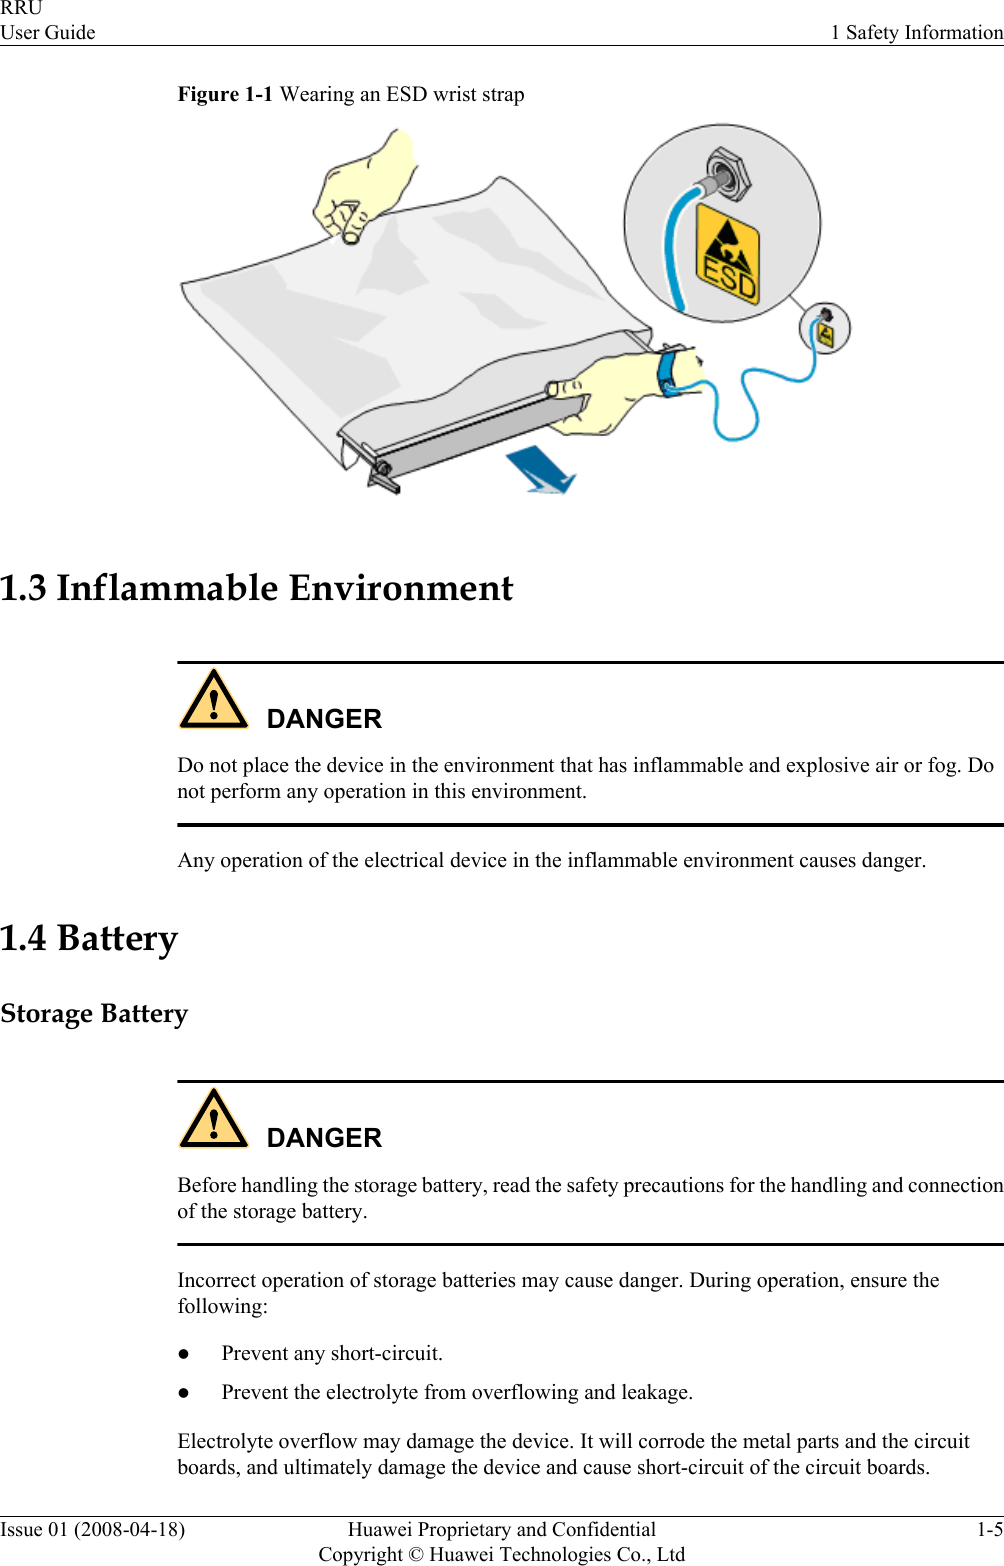 Figure 1-1 Wearing an ESD wrist strap1.3 Inflammable EnvironmentDANGERDo not place the device in the environment that has inflammable and explosive air or fog. Donot perform any operation in this environment.Any operation of the electrical device in the inflammable environment causes danger.1.4 BatteryStorage BatteryDANGERBefore handling the storage battery, read the safety precautions for the handling and connectionof the storage battery.Incorrect operation of storage batteries may cause danger. During operation, ensure thefollowing:lPrevent any short-circuit.lPrevent the electrolyte from overflowing and leakage.Electrolyte overflow may damage the device. It will corrode the metal parts and the circuitboards, and ultimately damage the device and cause short-circuit of the circuit boards.RRUUser Guide 1 Safety InformationIssue 01 (2008-04-18) Huawei Proprietary and ConfidentialCopyright © Huawei Technologies Co., Ltd1-5